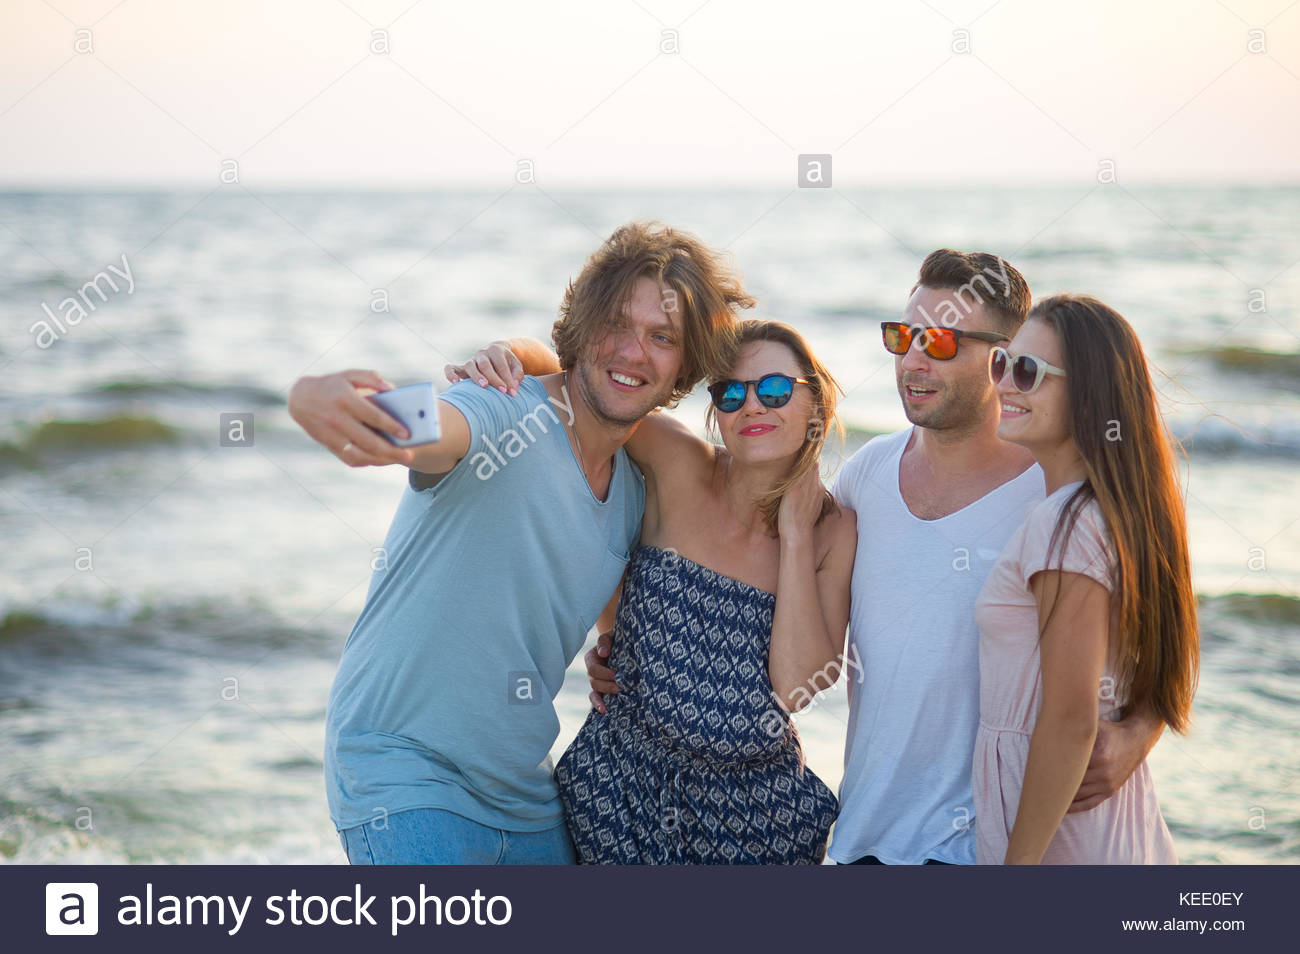 group-of-cheerful-young-people-photographed-on-the-beach-two-guys-KEE0EY.jpg